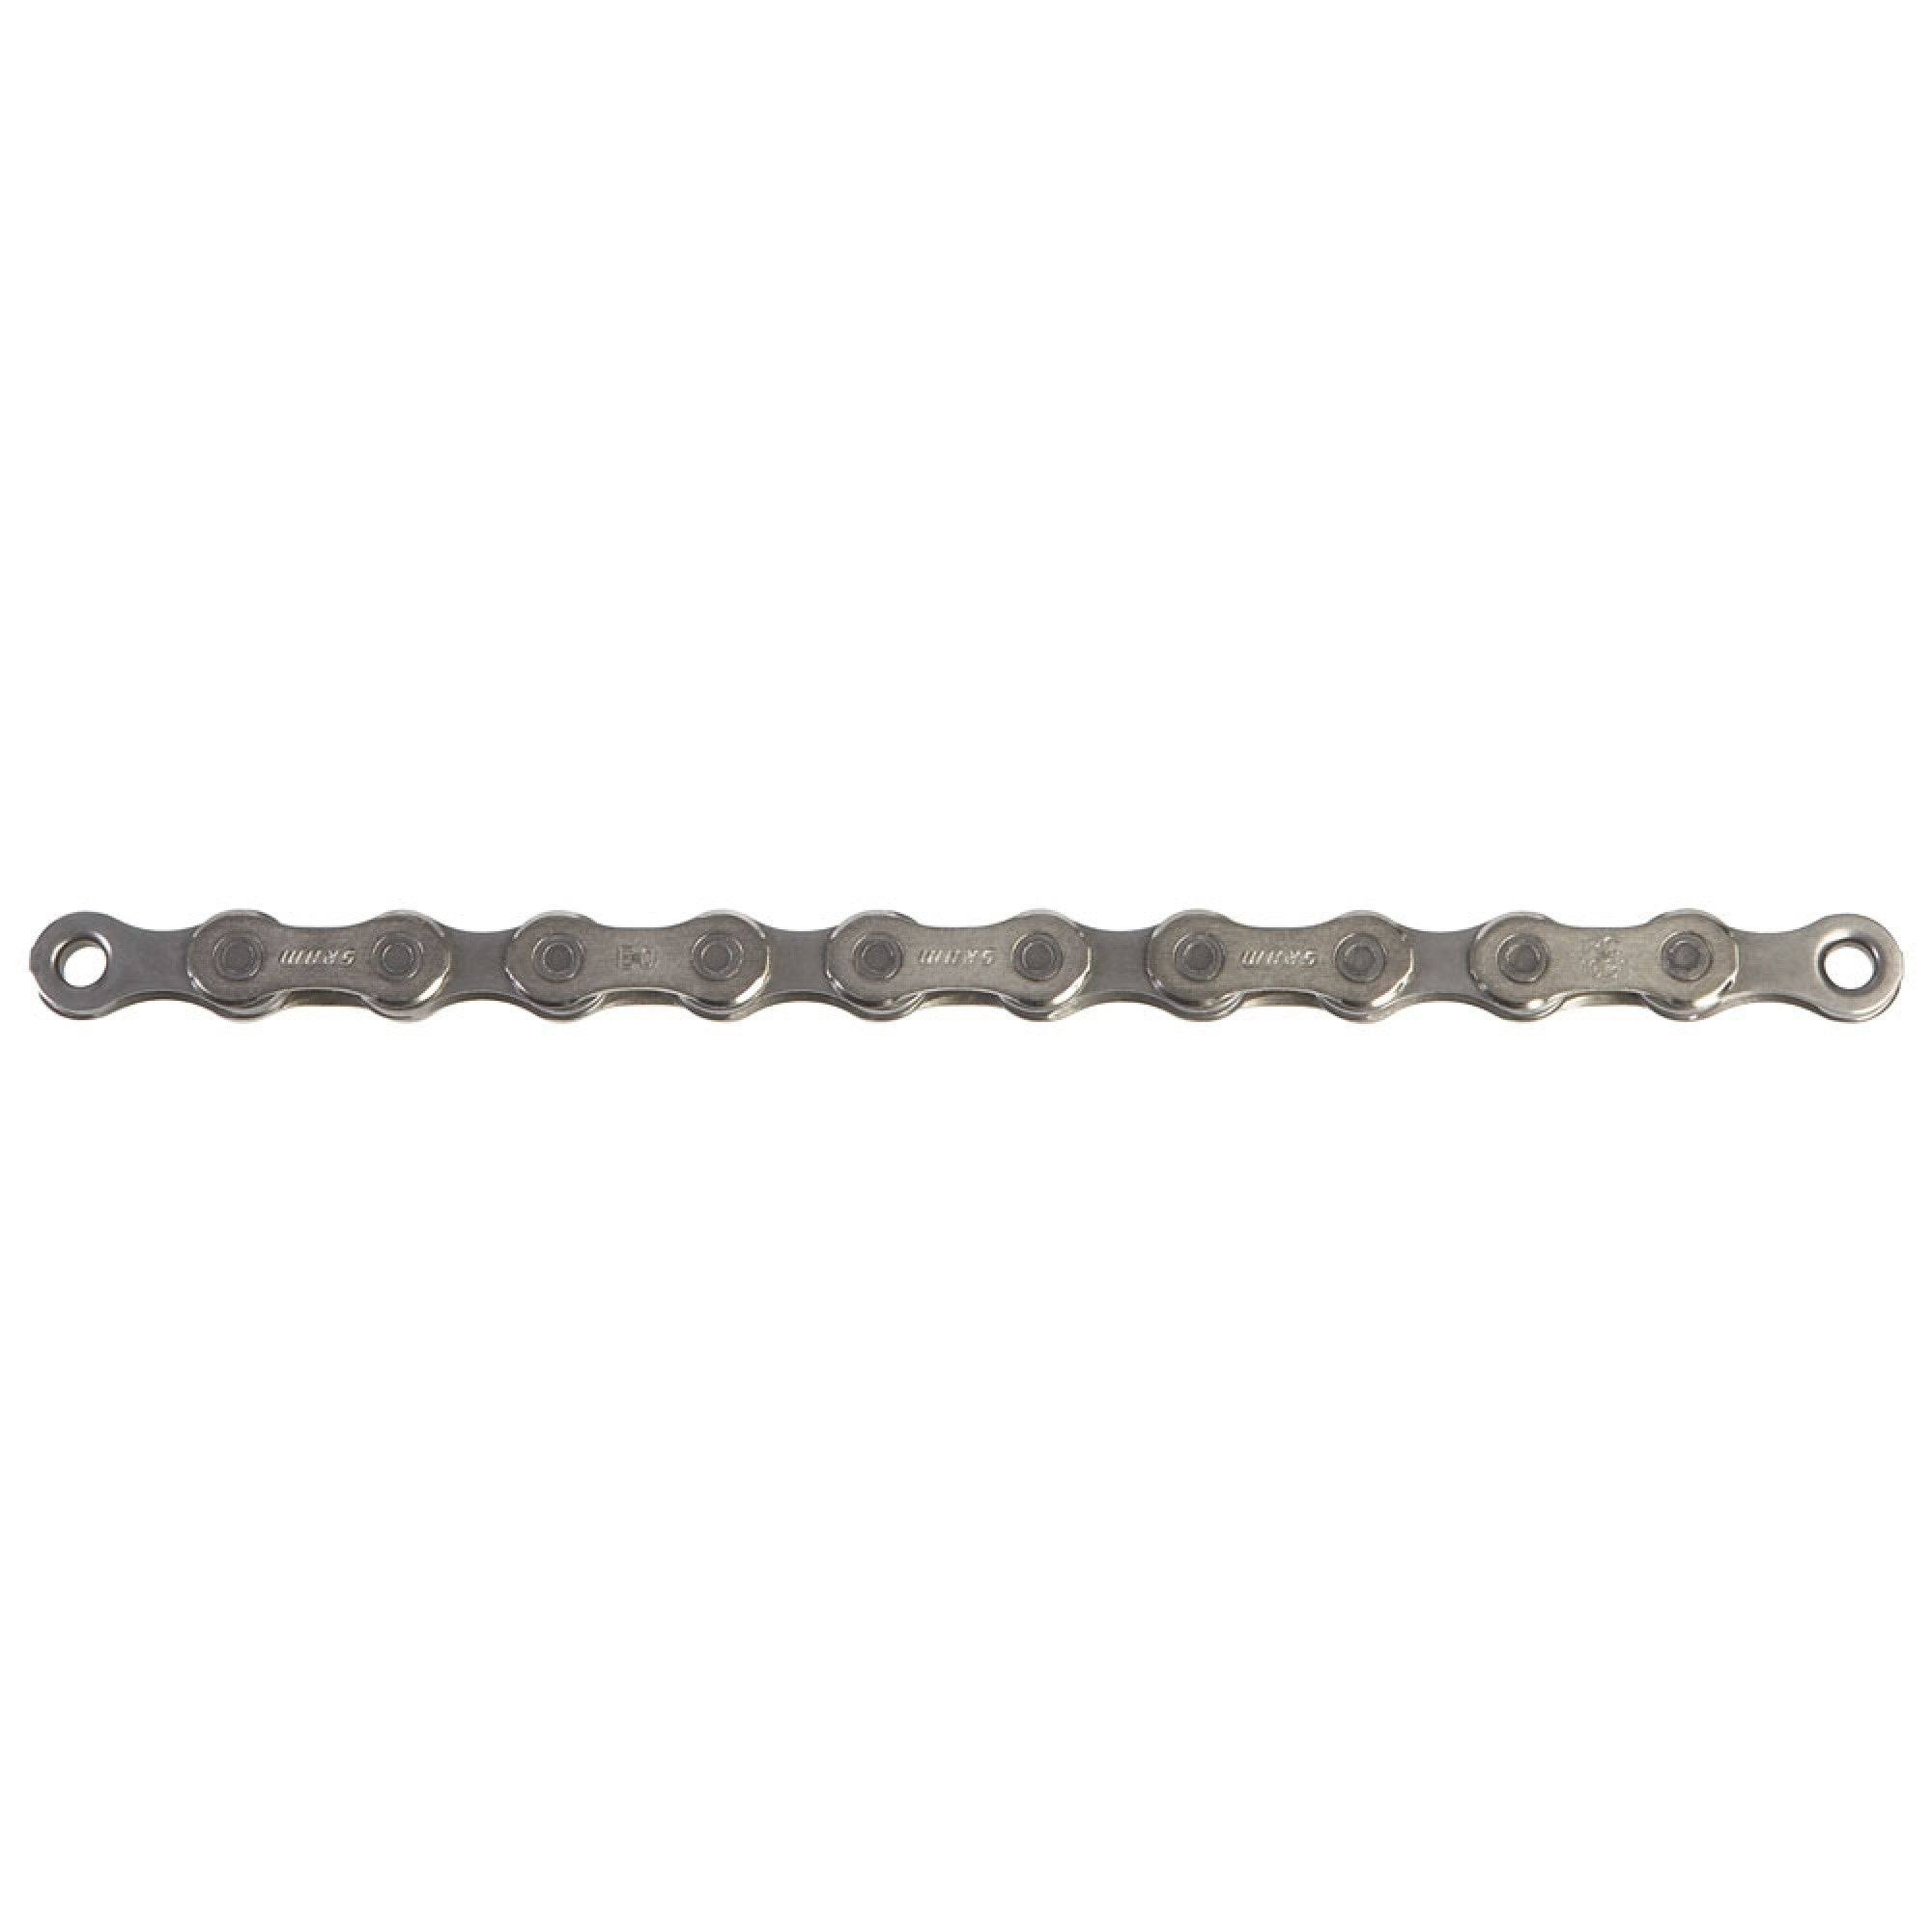 SRAM PC1031 10-Speed Bicycle Chain